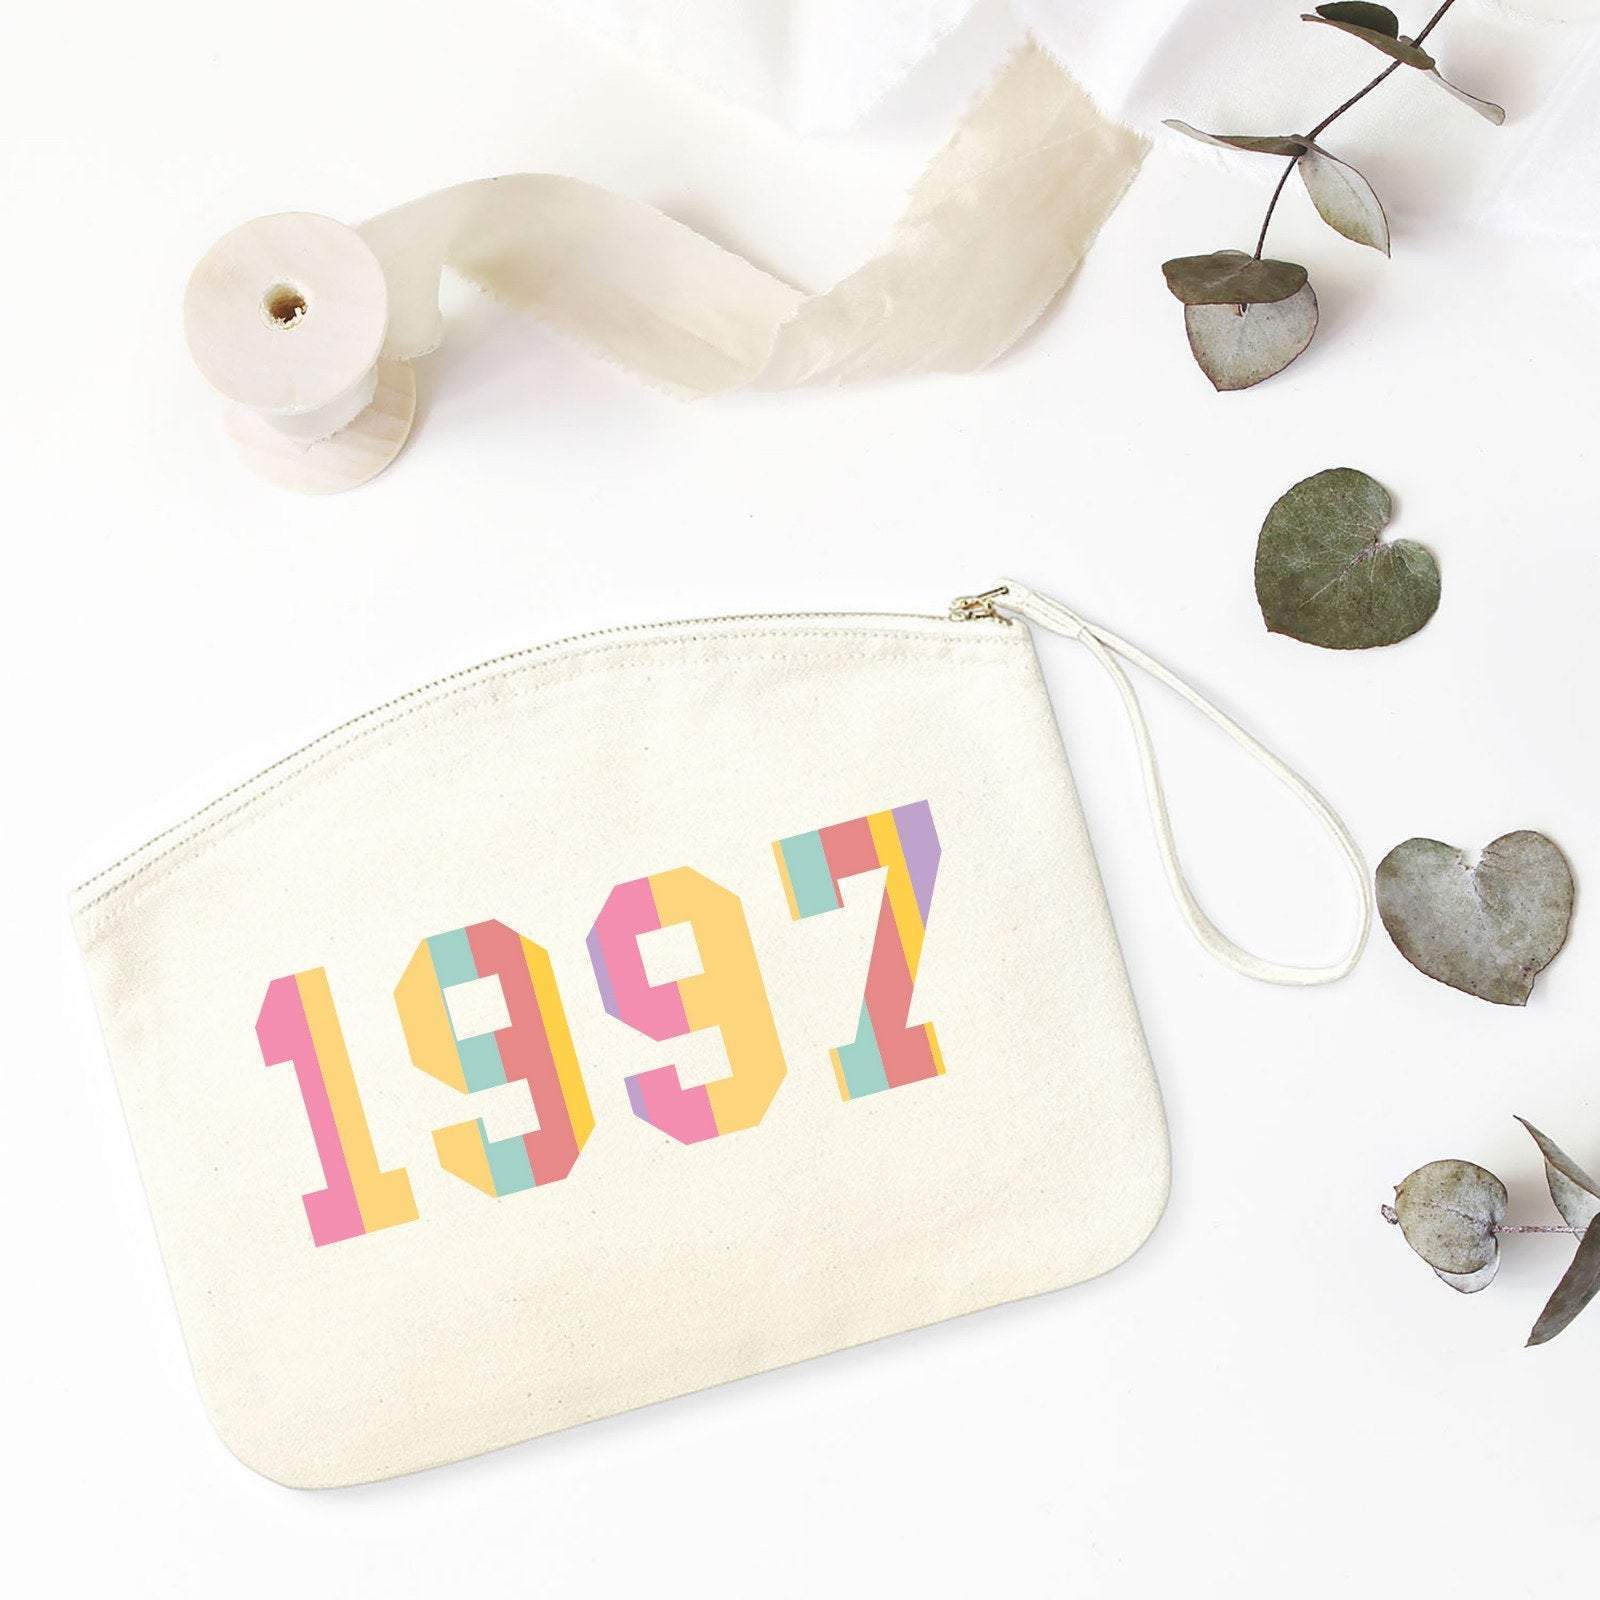 Personalised year makeup bag, Birthday gifts for women, Wife unique birthday or Christmas gift